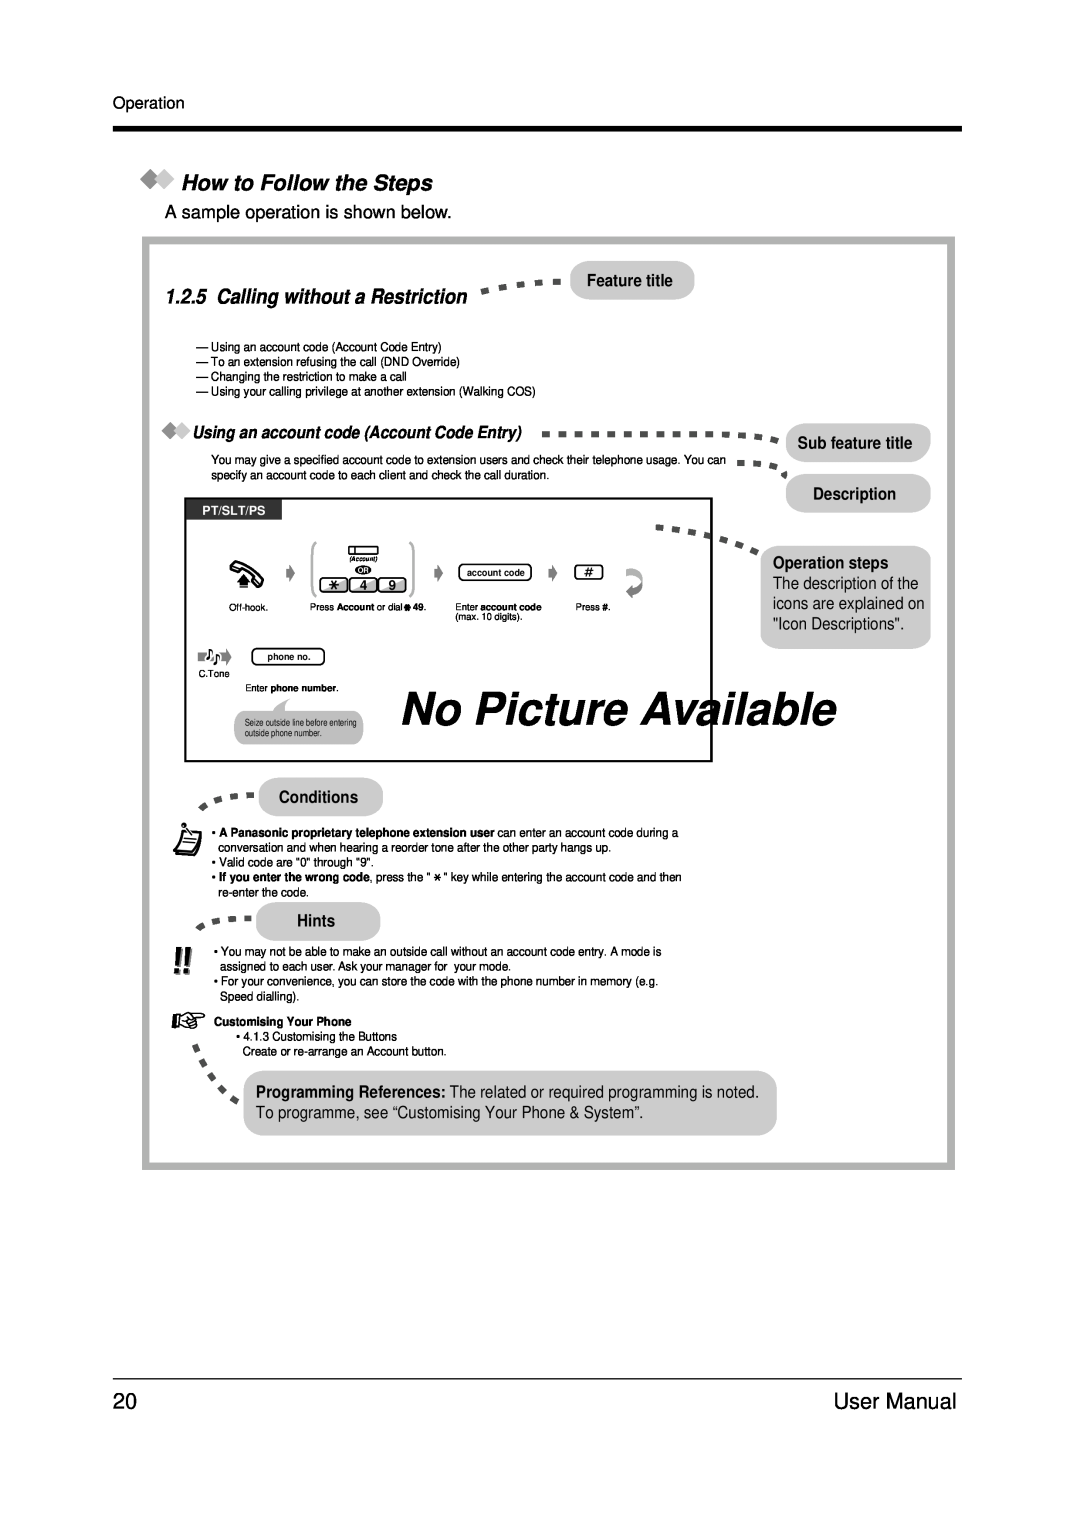 Panasonic KX-TDA200 user manual No Picture Available, How to Follow the Steps, Calling without a Restriction, Pt/Slt/Ps 